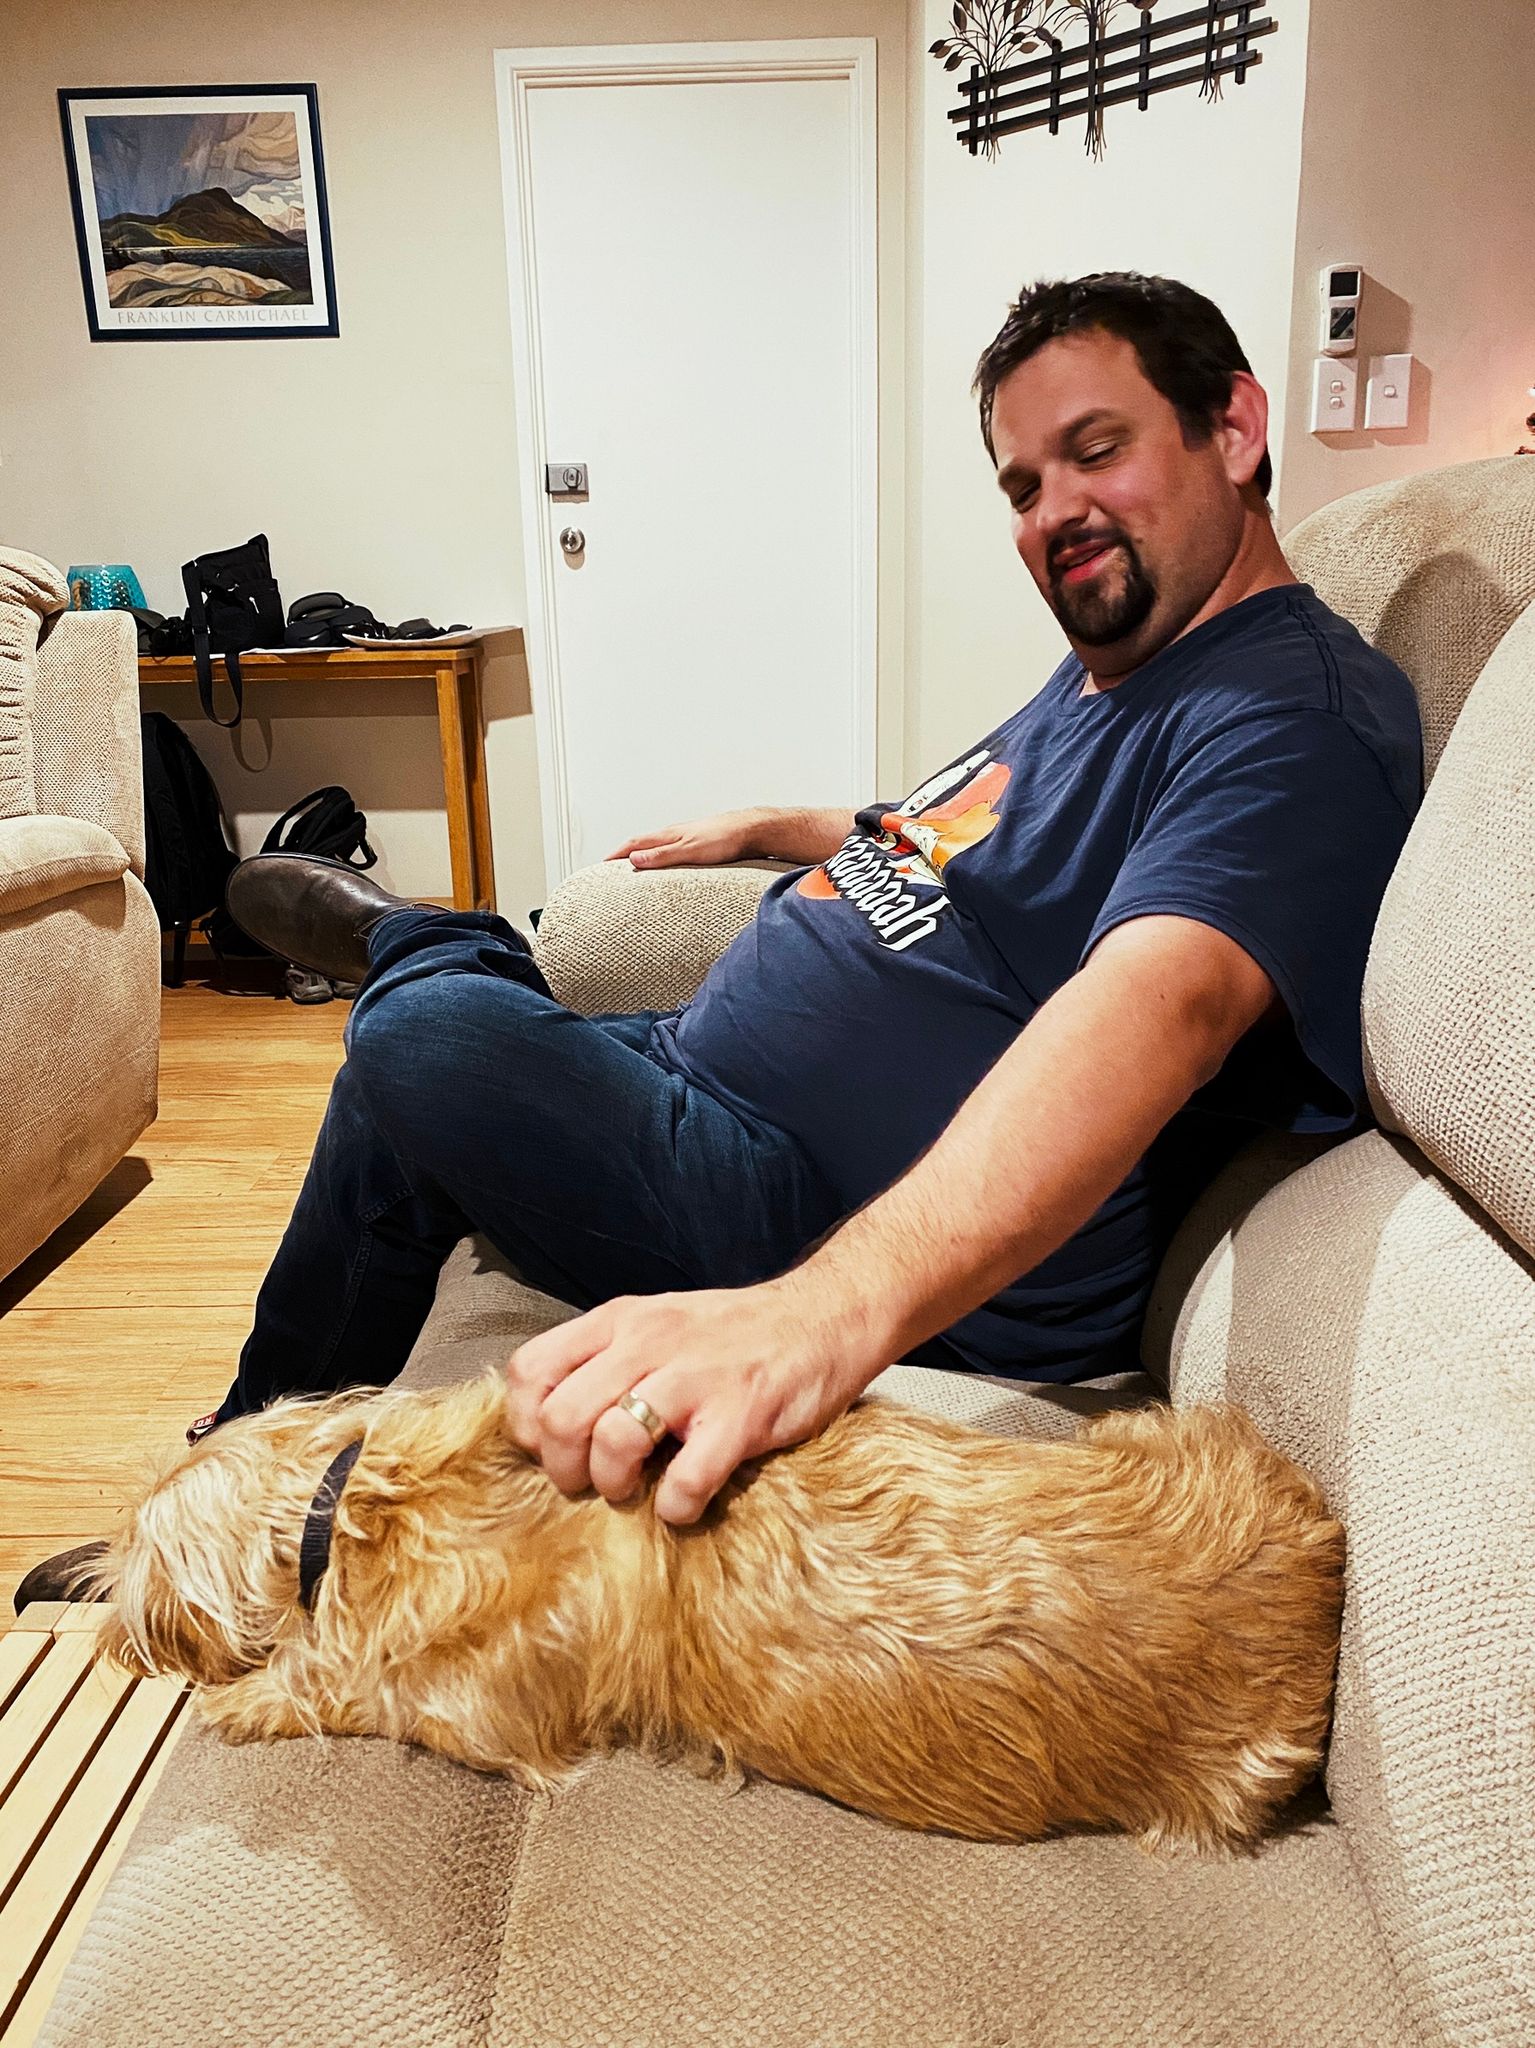 A photo of a white man in a t-shirt sitting on a lounge, giving pats to a small scruffy blonde dog that's lying down next to him.